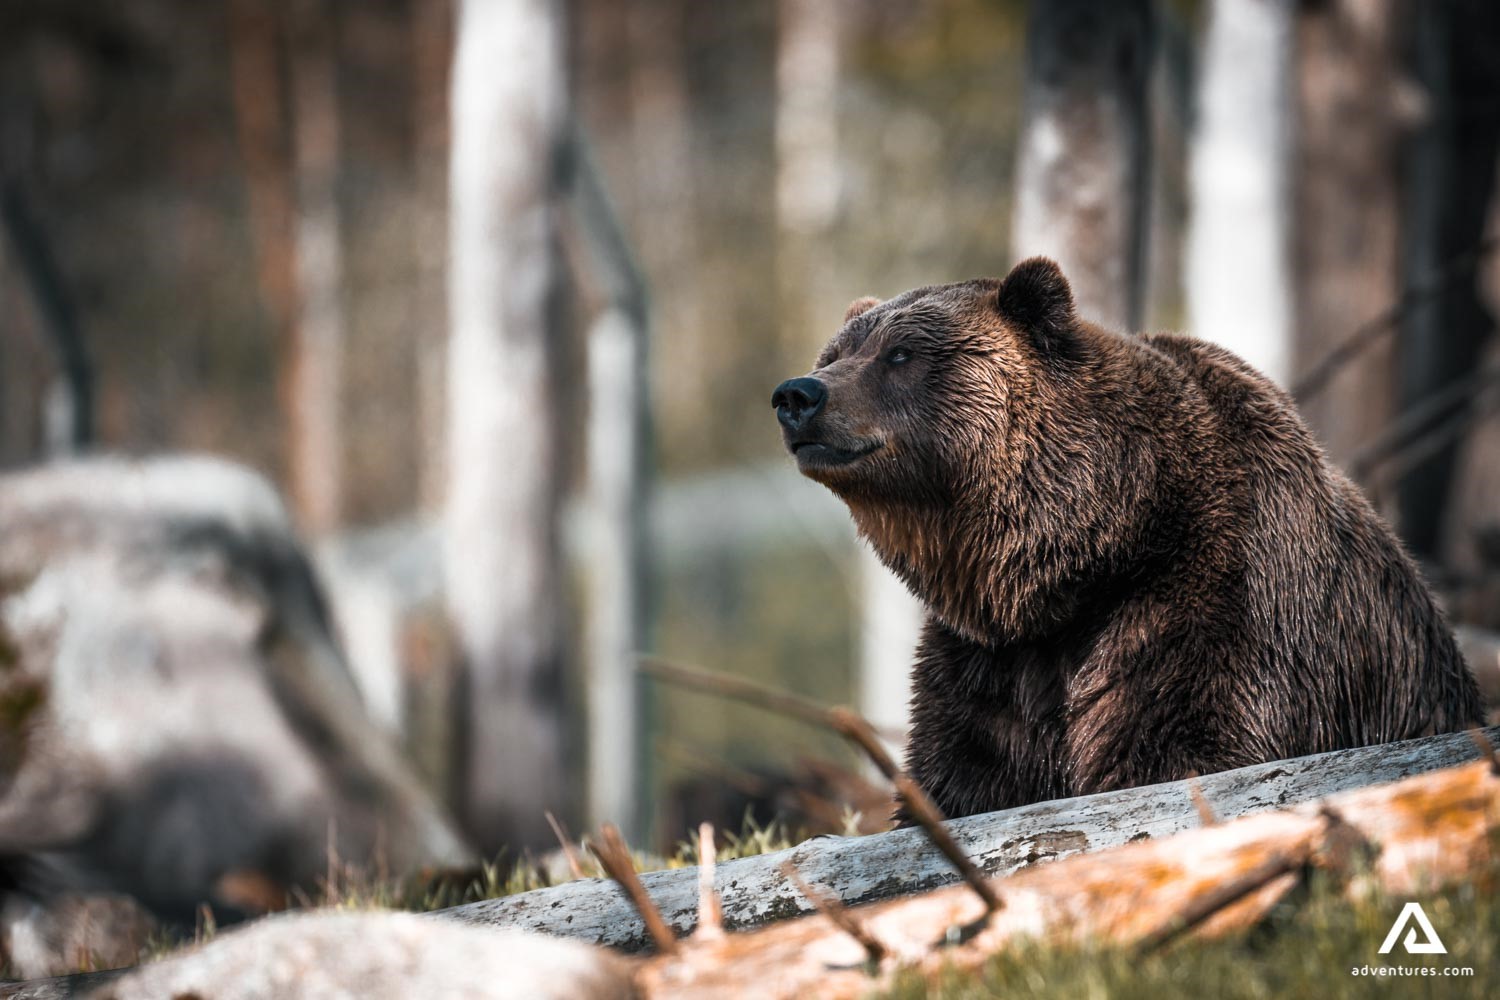 Brown Bear in the forest